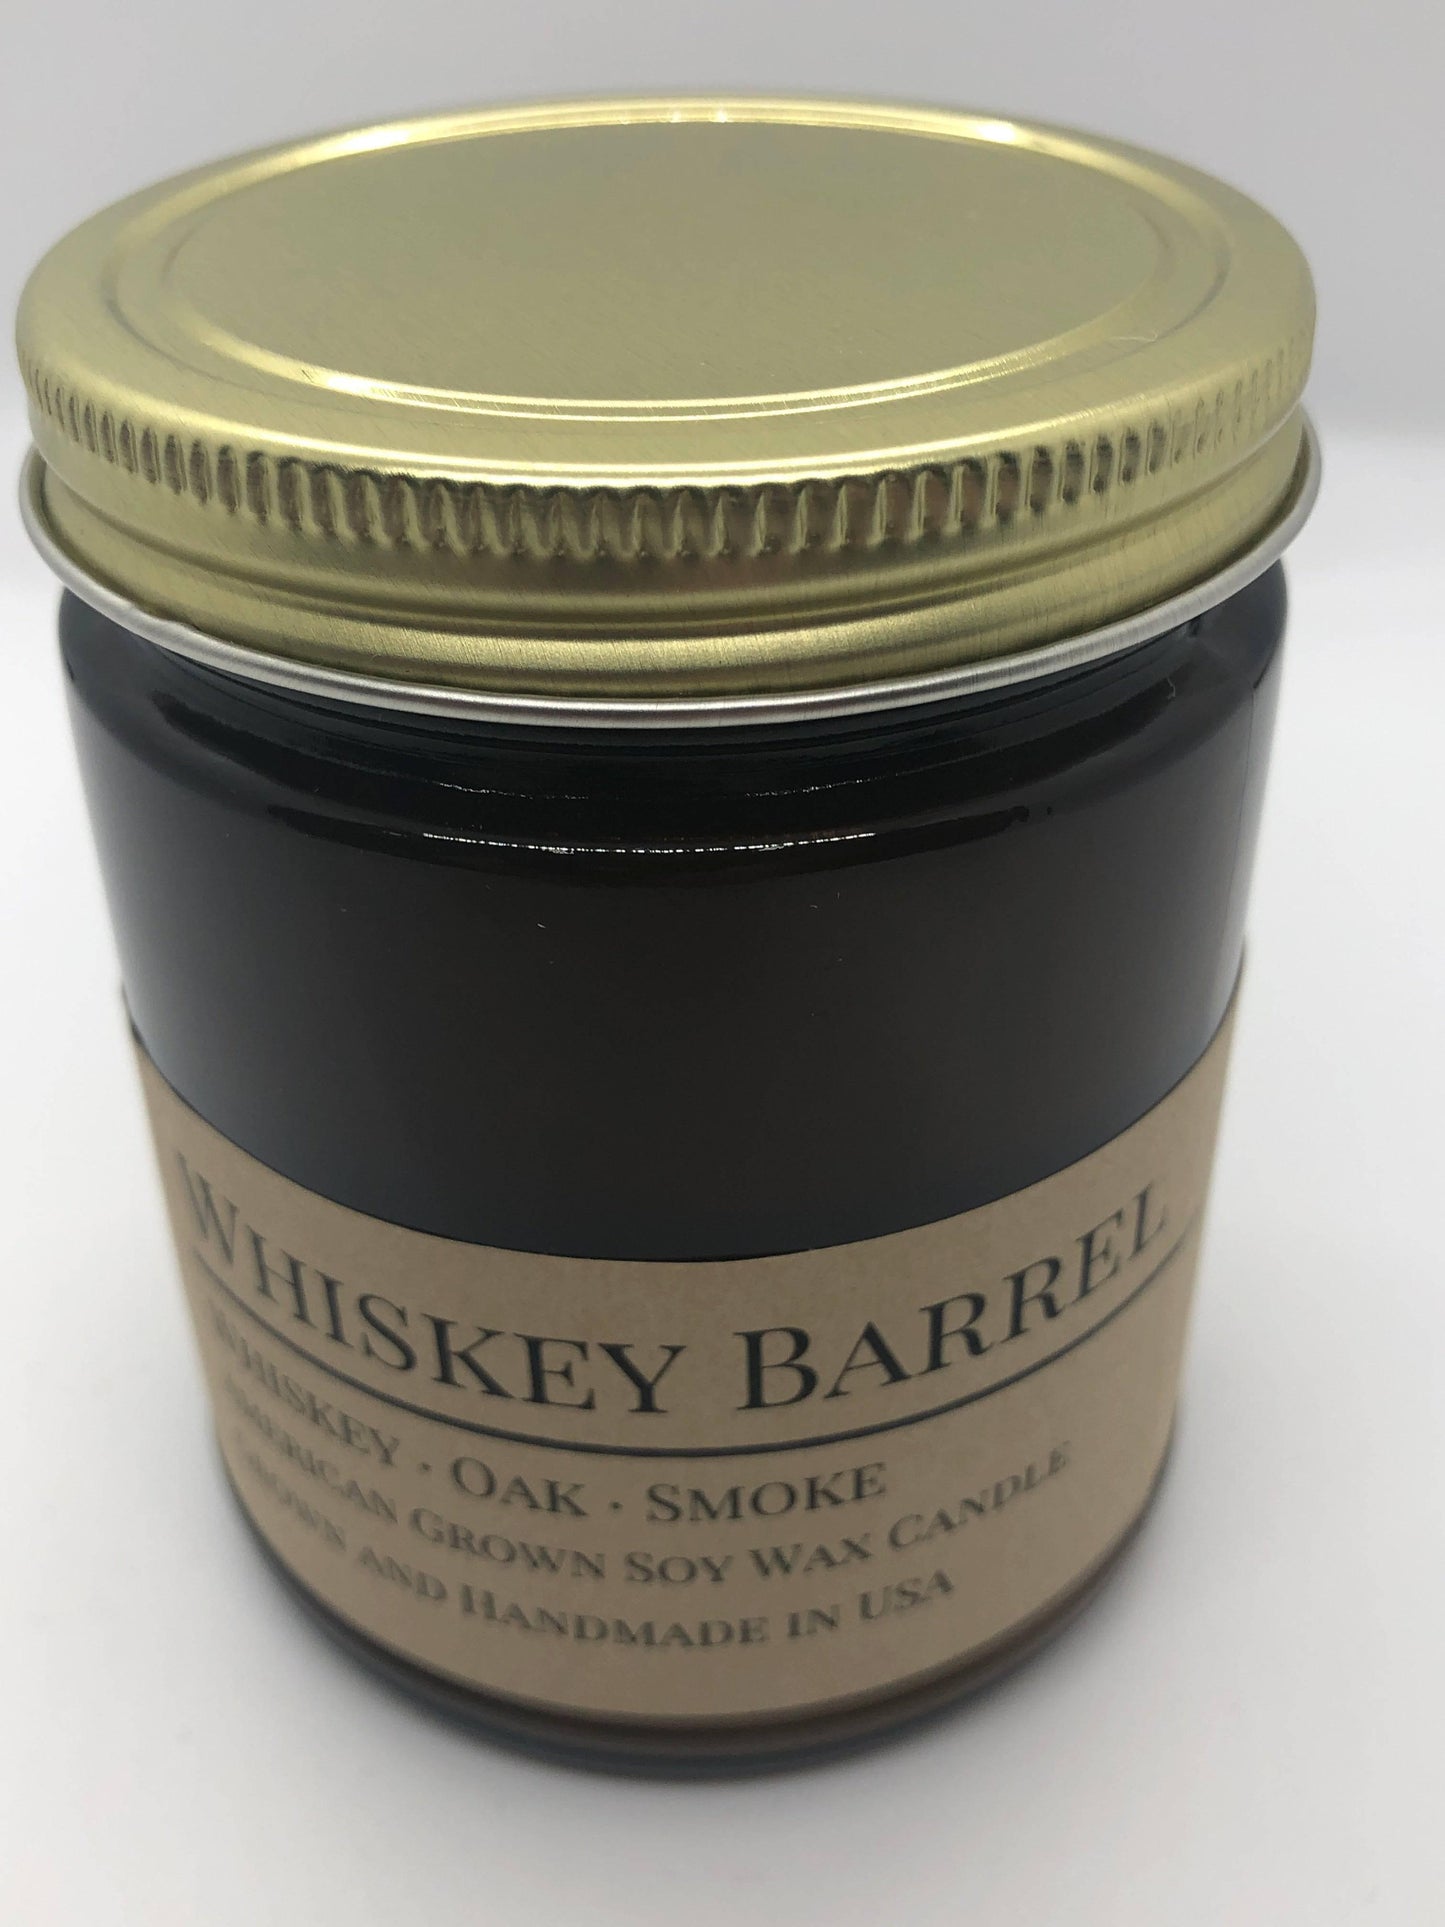 whiskey barrel soy wax candle | 9 oz amber apothecary jar by prairie fire tallow, candles, and lavender